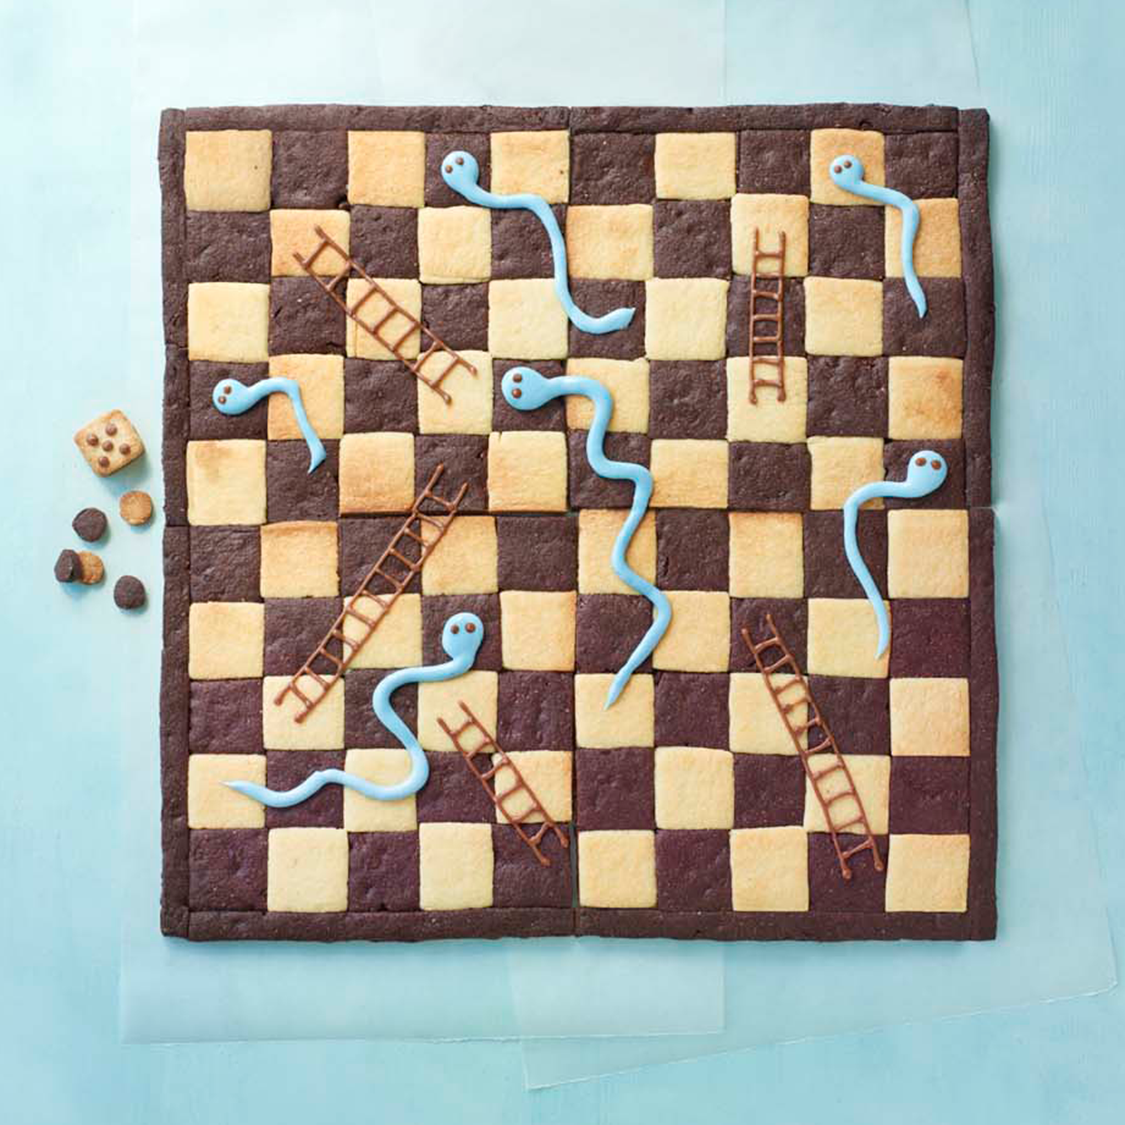 Sophie's Snakes & Ladders Biscuit Board Game - The Great British Bake Off |  The Great British Bake Off